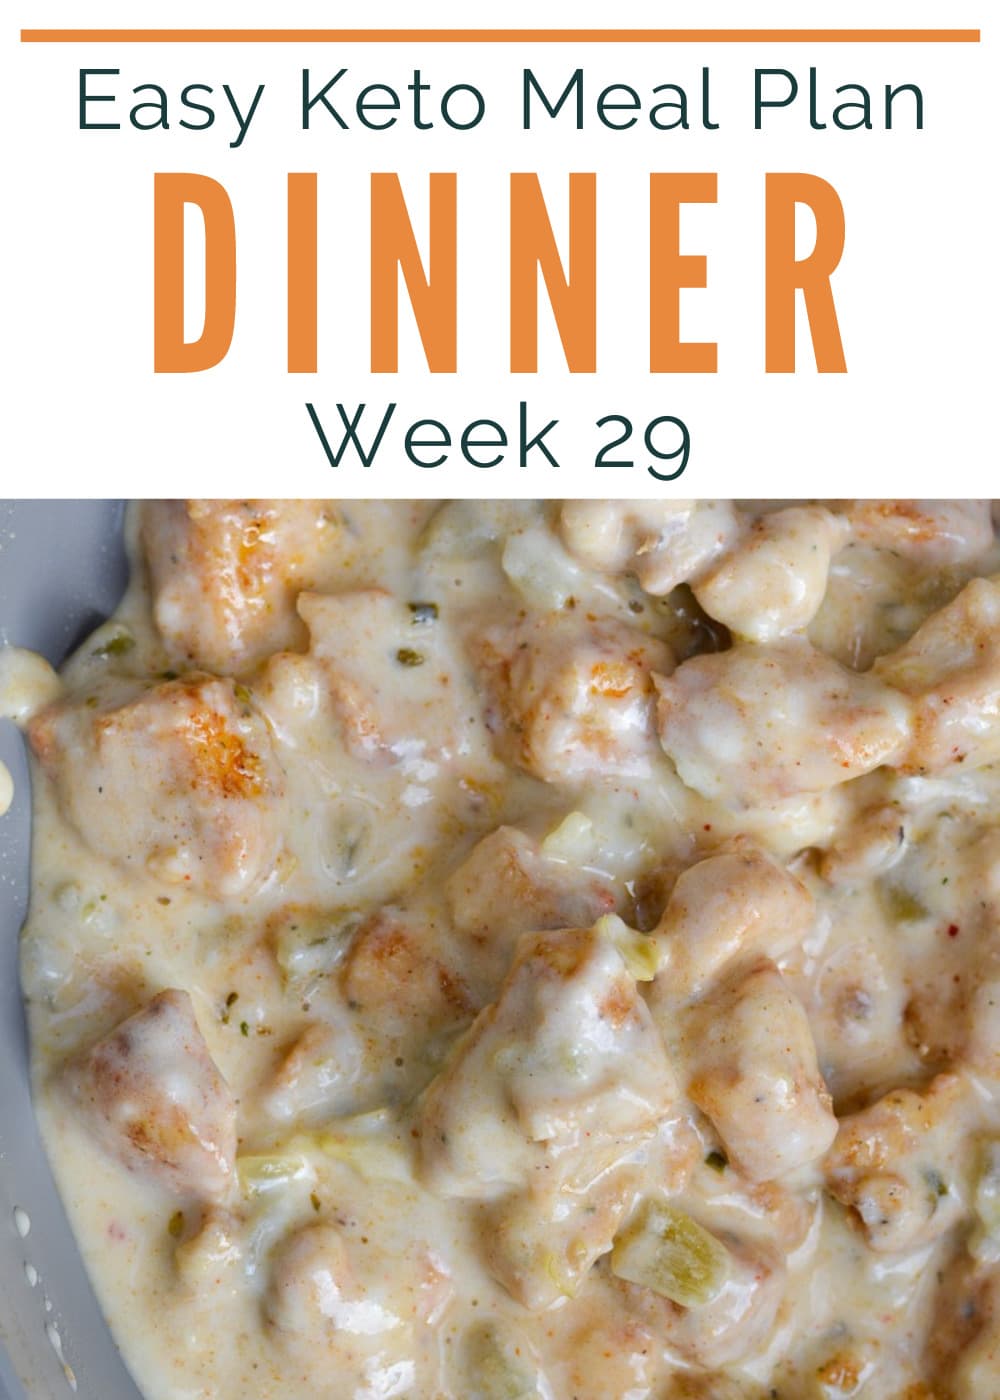 My Easy Keto Meal Plan includes 5 delicious keto dinners as well as an easy low-carb meal prep dessert! Download the printable meal plan and shopping list with net carb counts for an easy week of keto recipes!